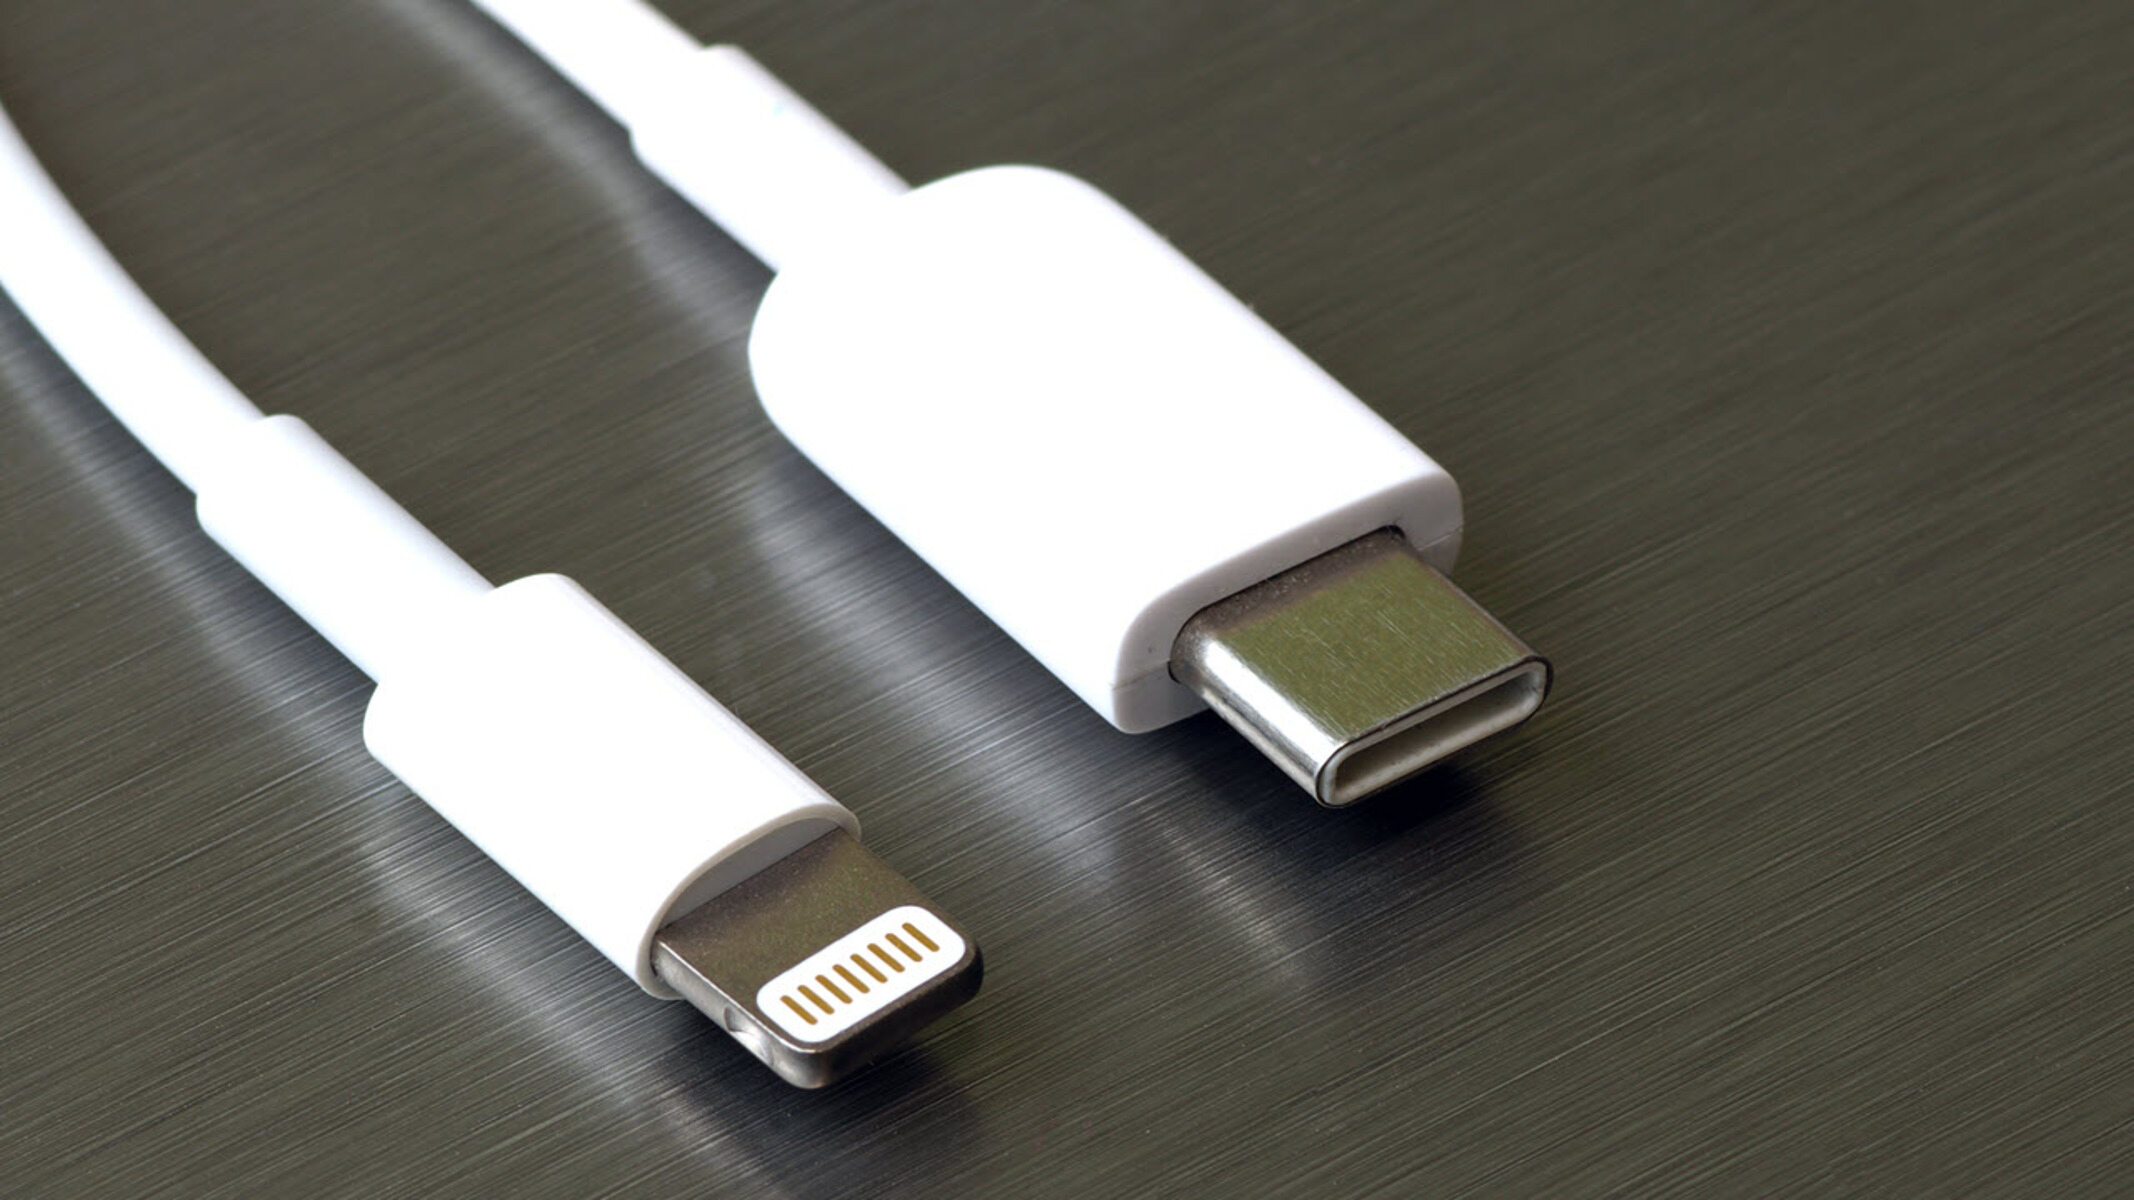 USB-C Vs. Lightning: What’s The Difference?